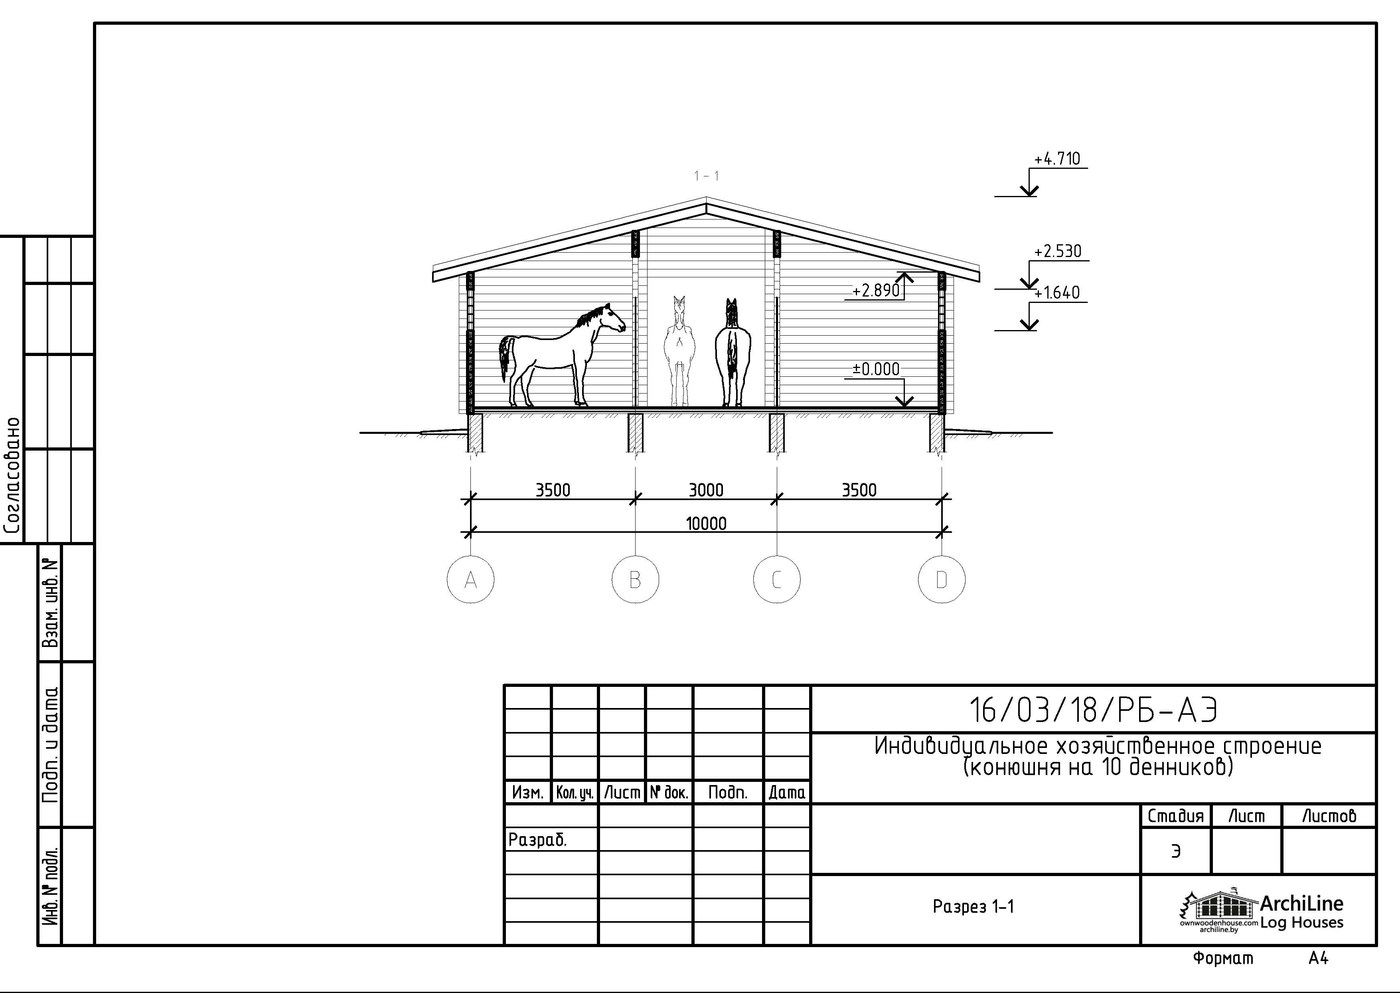 Horse Stable Construction — project price of the stables